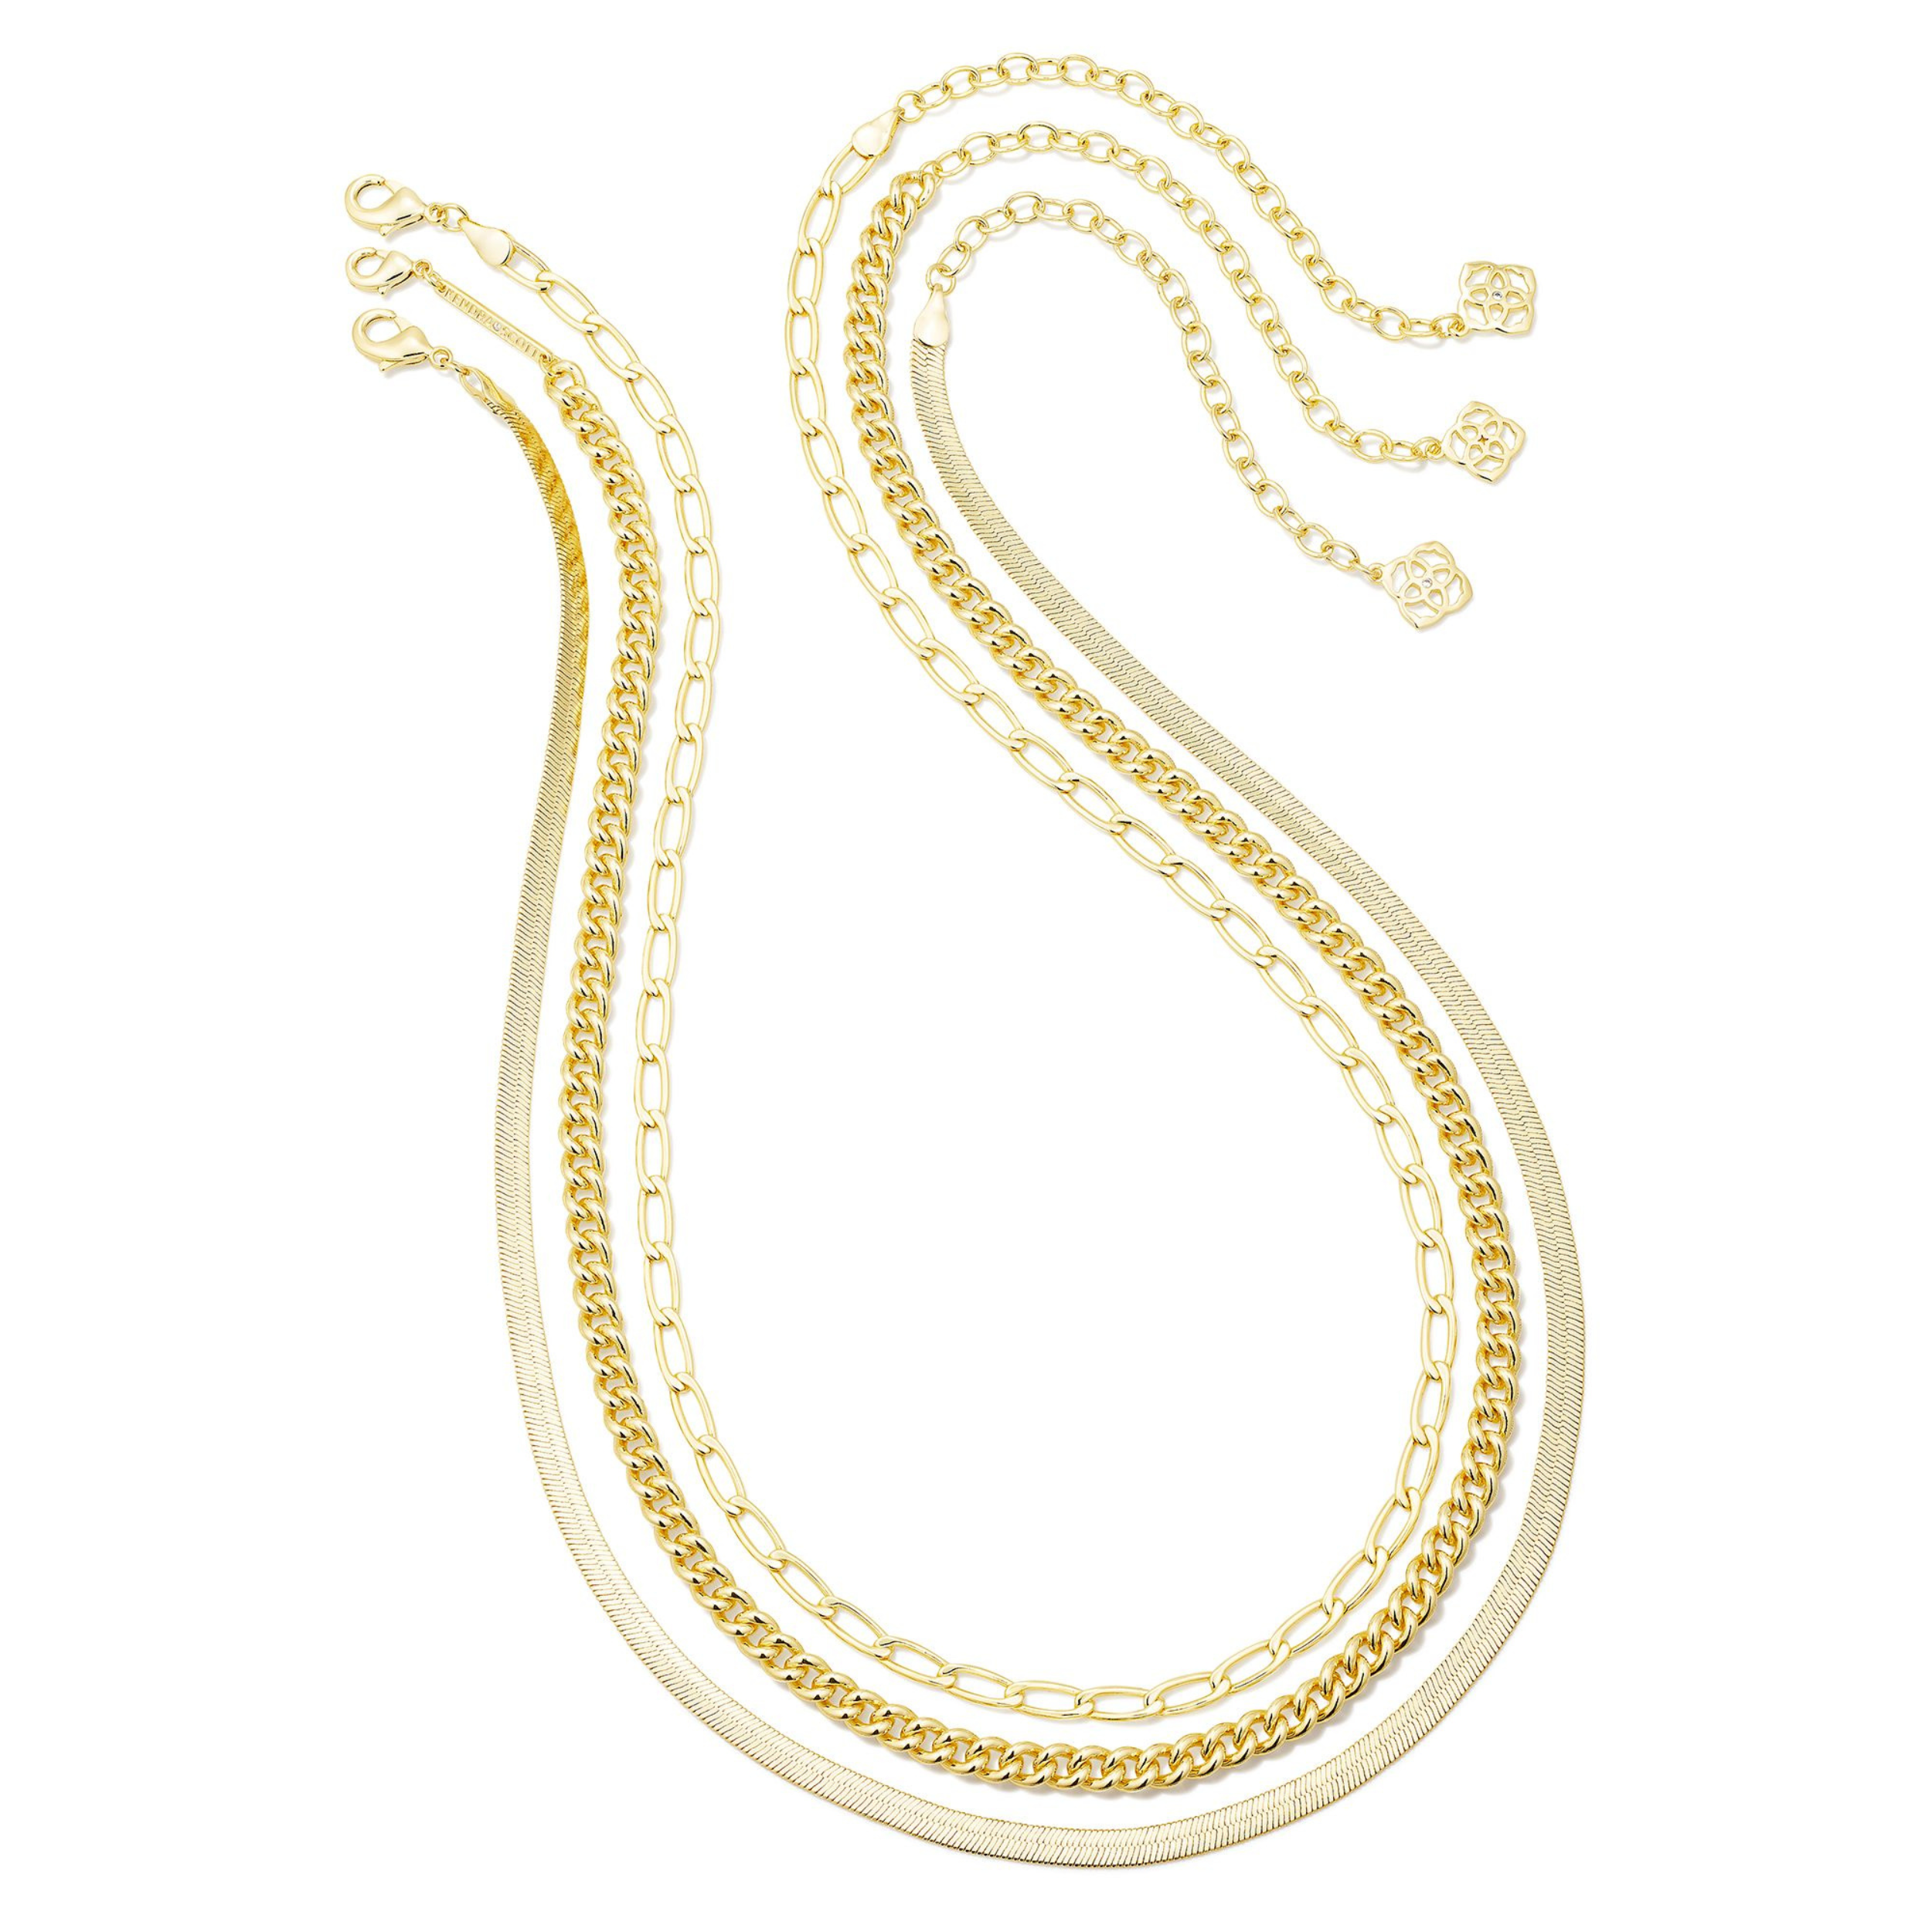 Three chain necklaces pictured on a white background. 